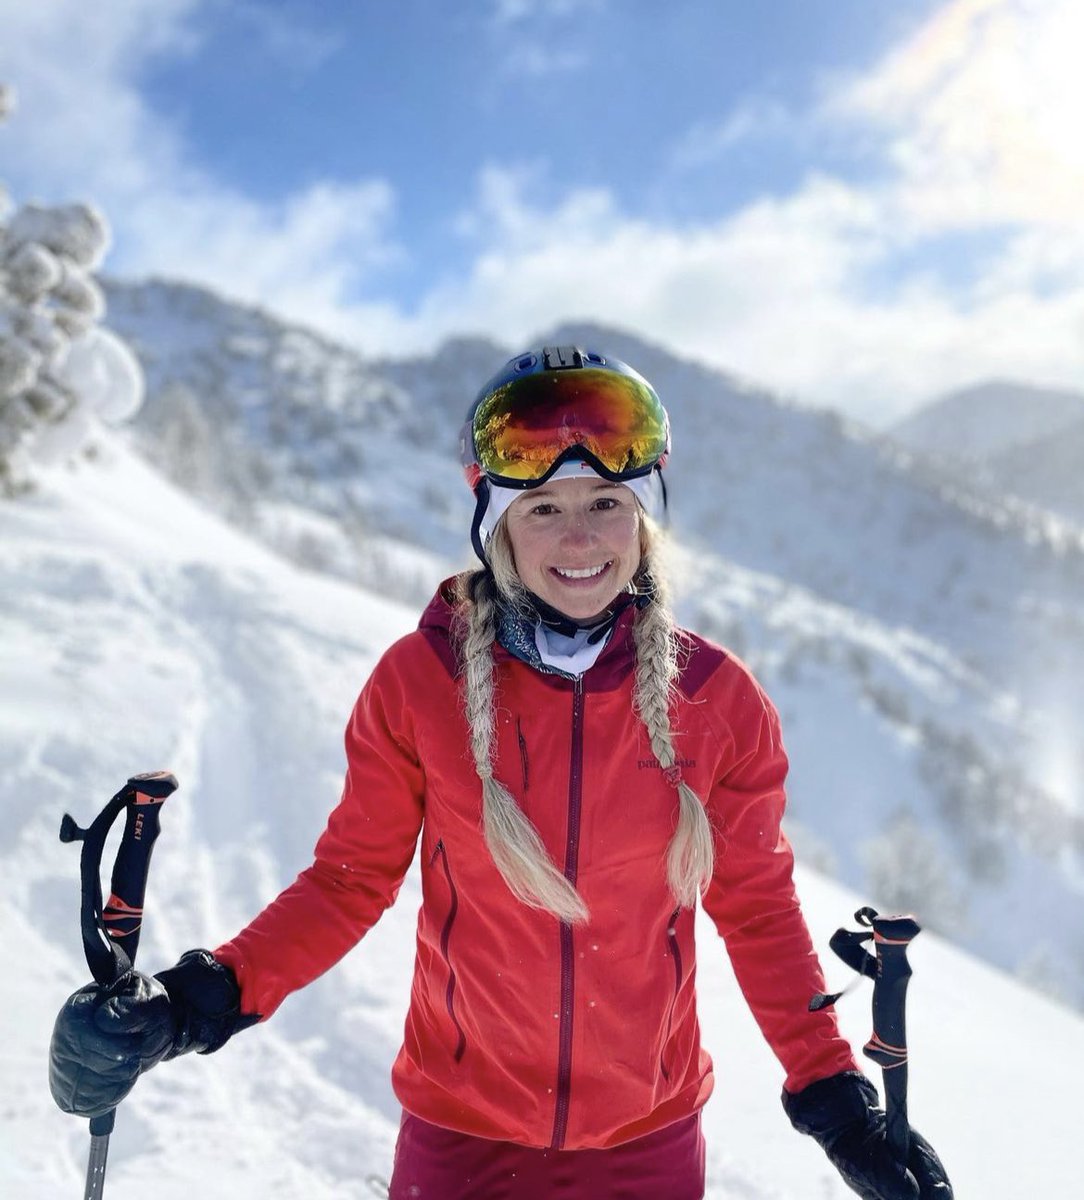 If we don’t take action on climate and transition to a renewable energy future, we risk losing the snowsports we love so much as well as needlessly endangering the health and lives of many people and animals around the world. As Utah’s next United States Senator, I am going to…